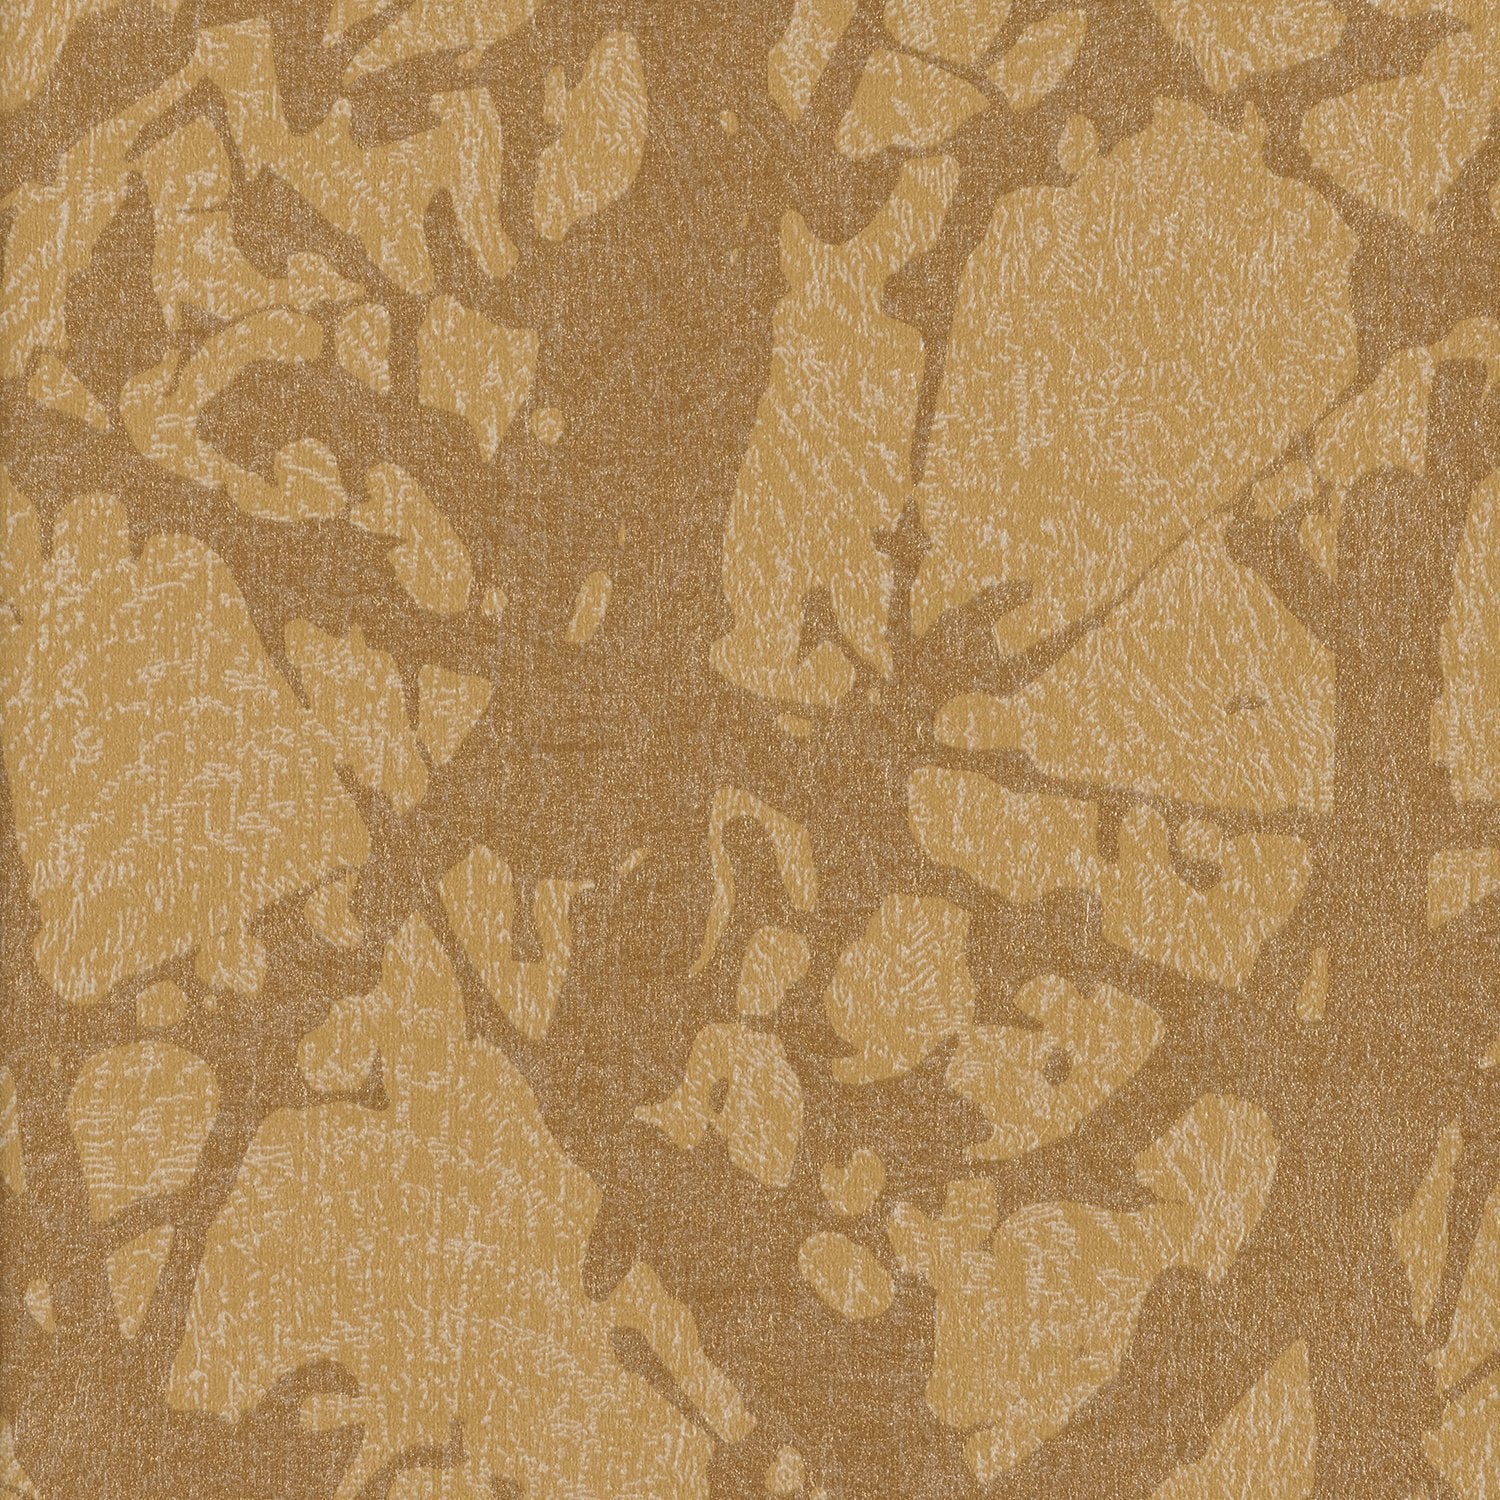 Canopy - Y46845 - Wallcovering - Vycon - Kube Contract